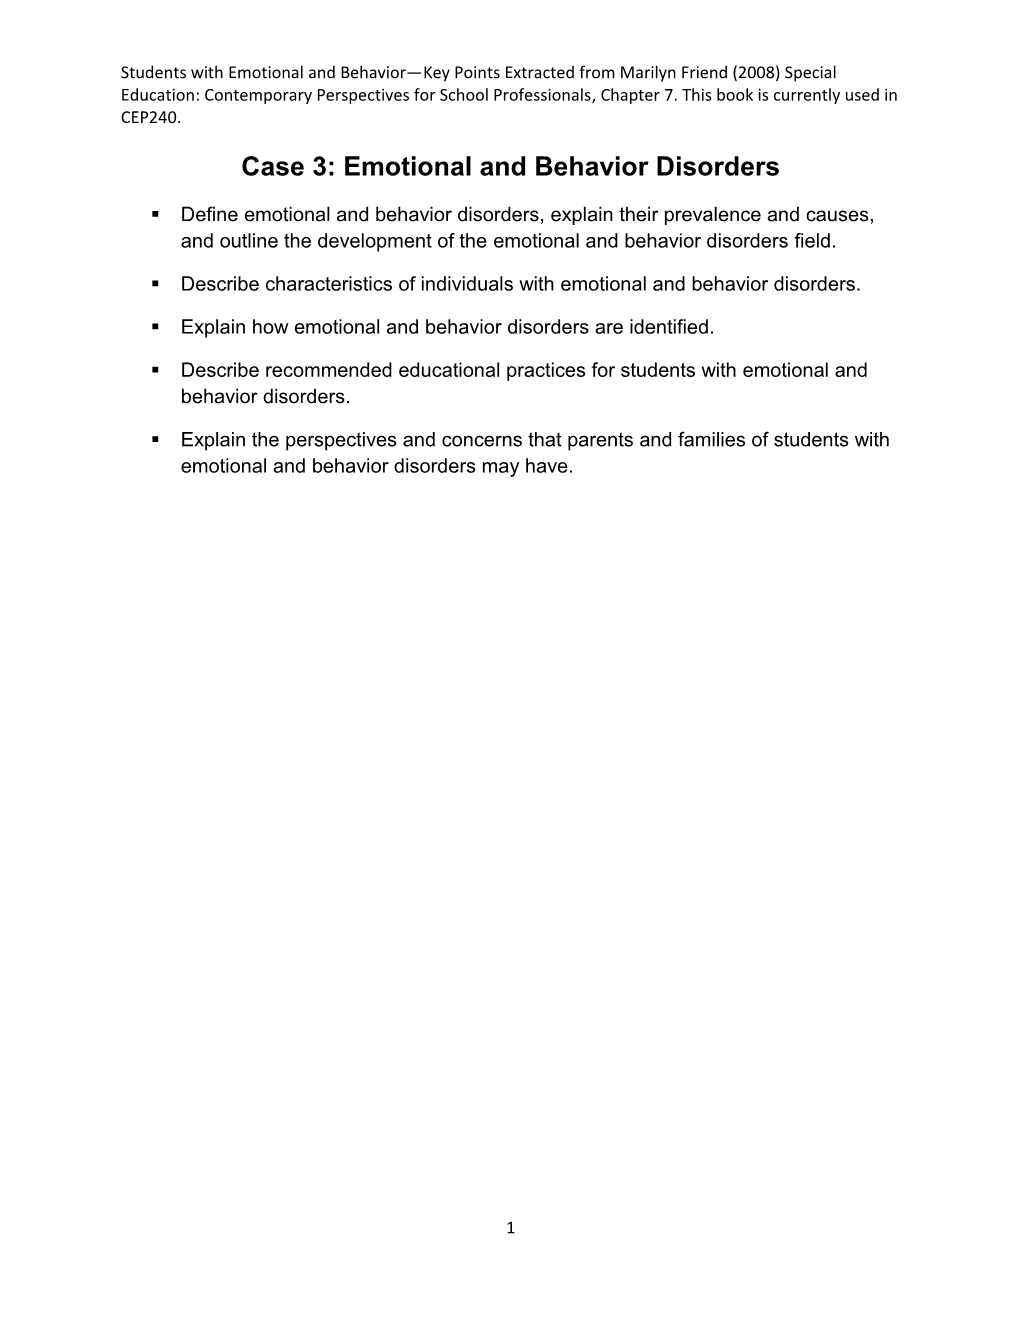 Case 3: Emotional and Behavior Disorders